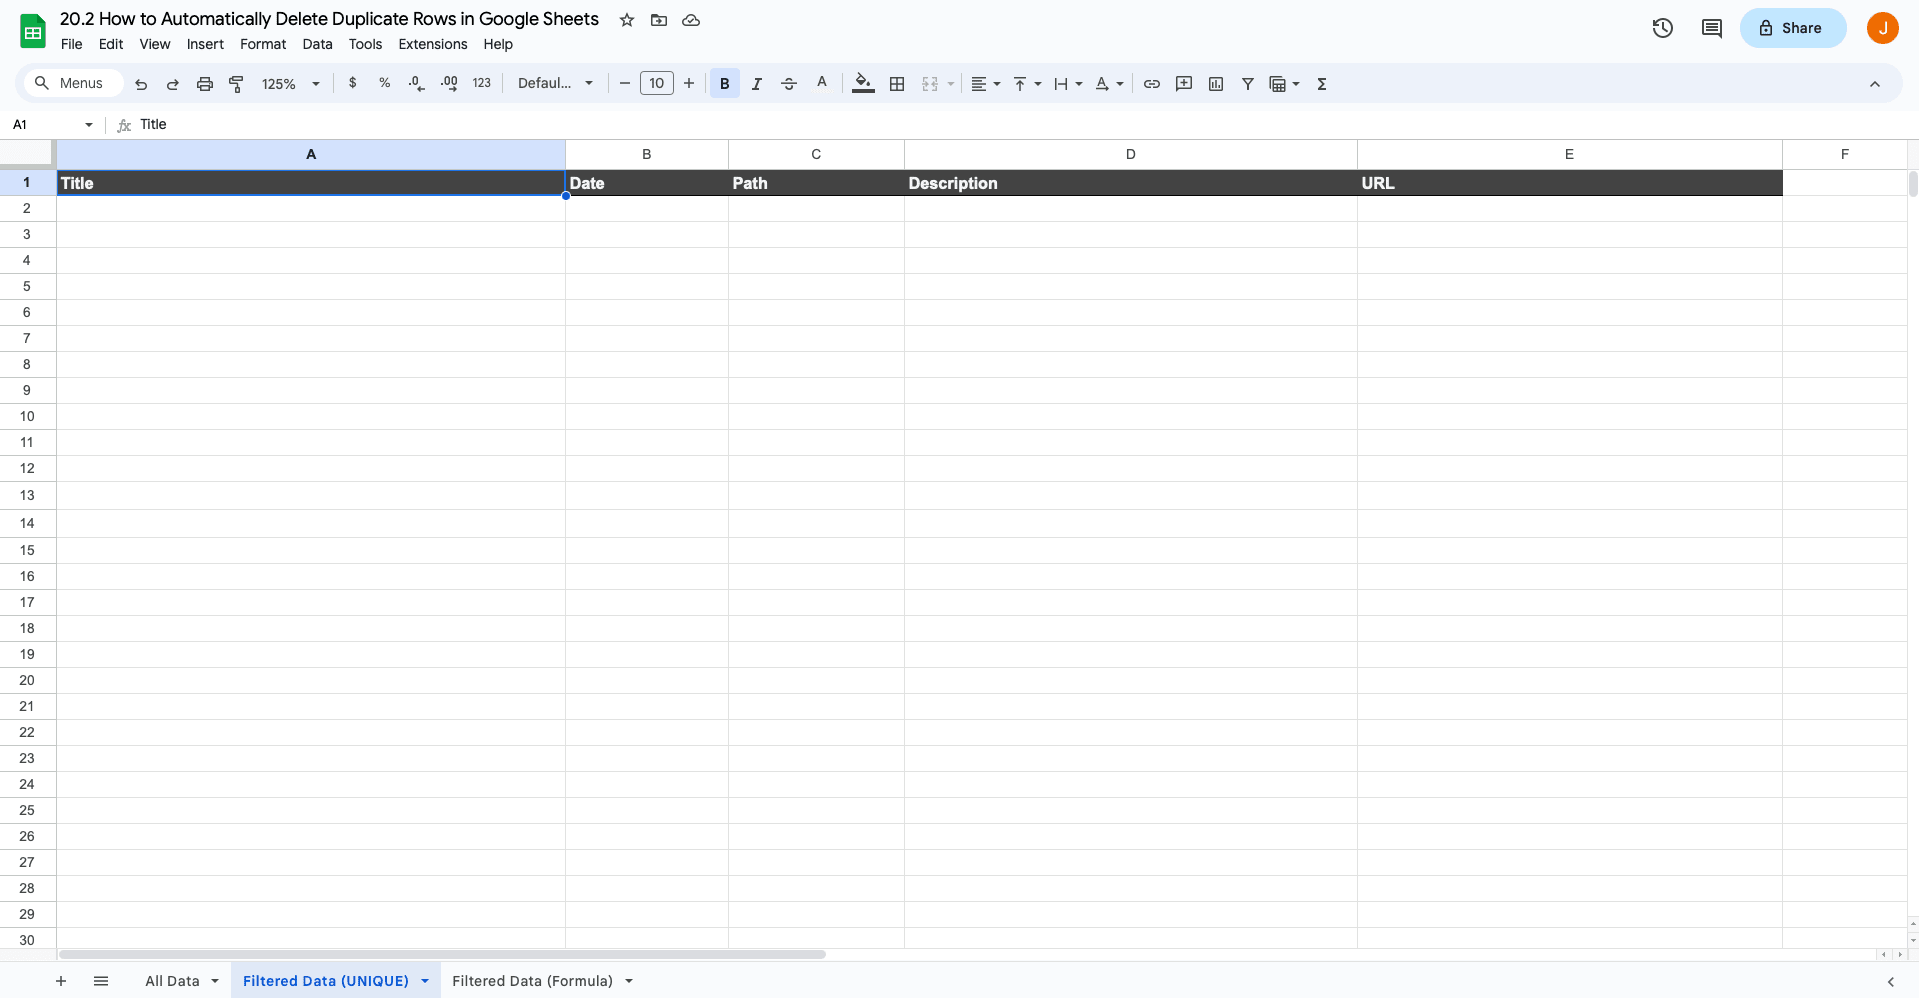 Screenshot of Google Sheets spreadsheet with new table and headers for filtered data